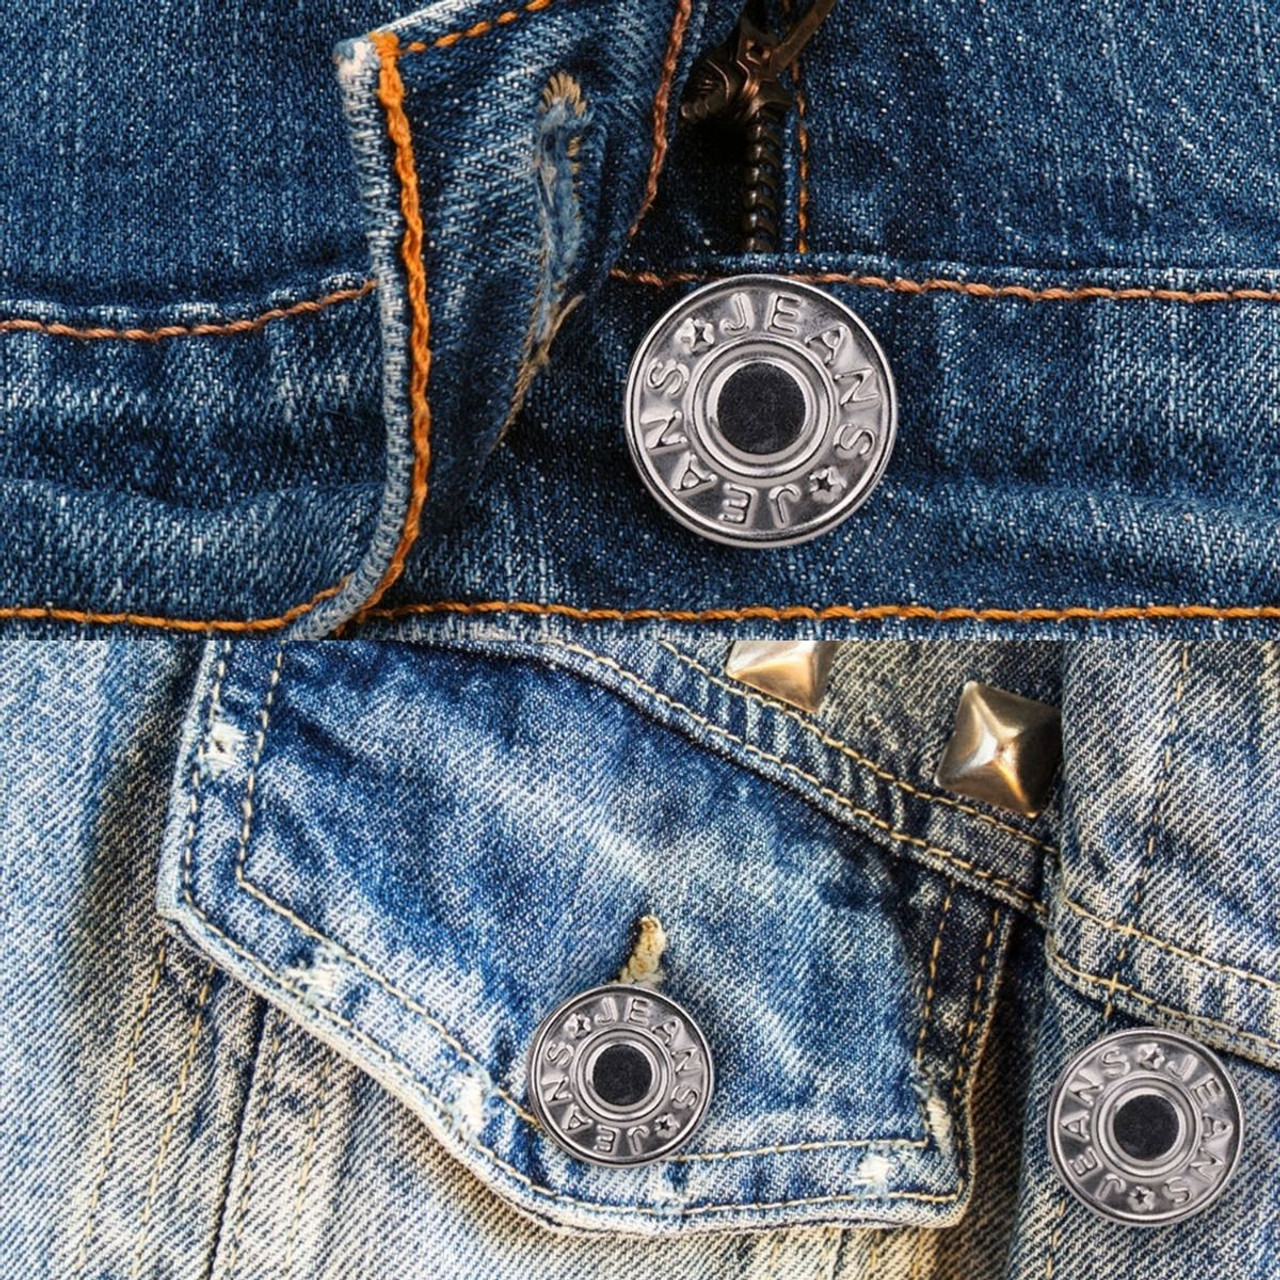 17mm No-Sew Jeans Replacement Jean Buttons - Silver - Trimming Shop